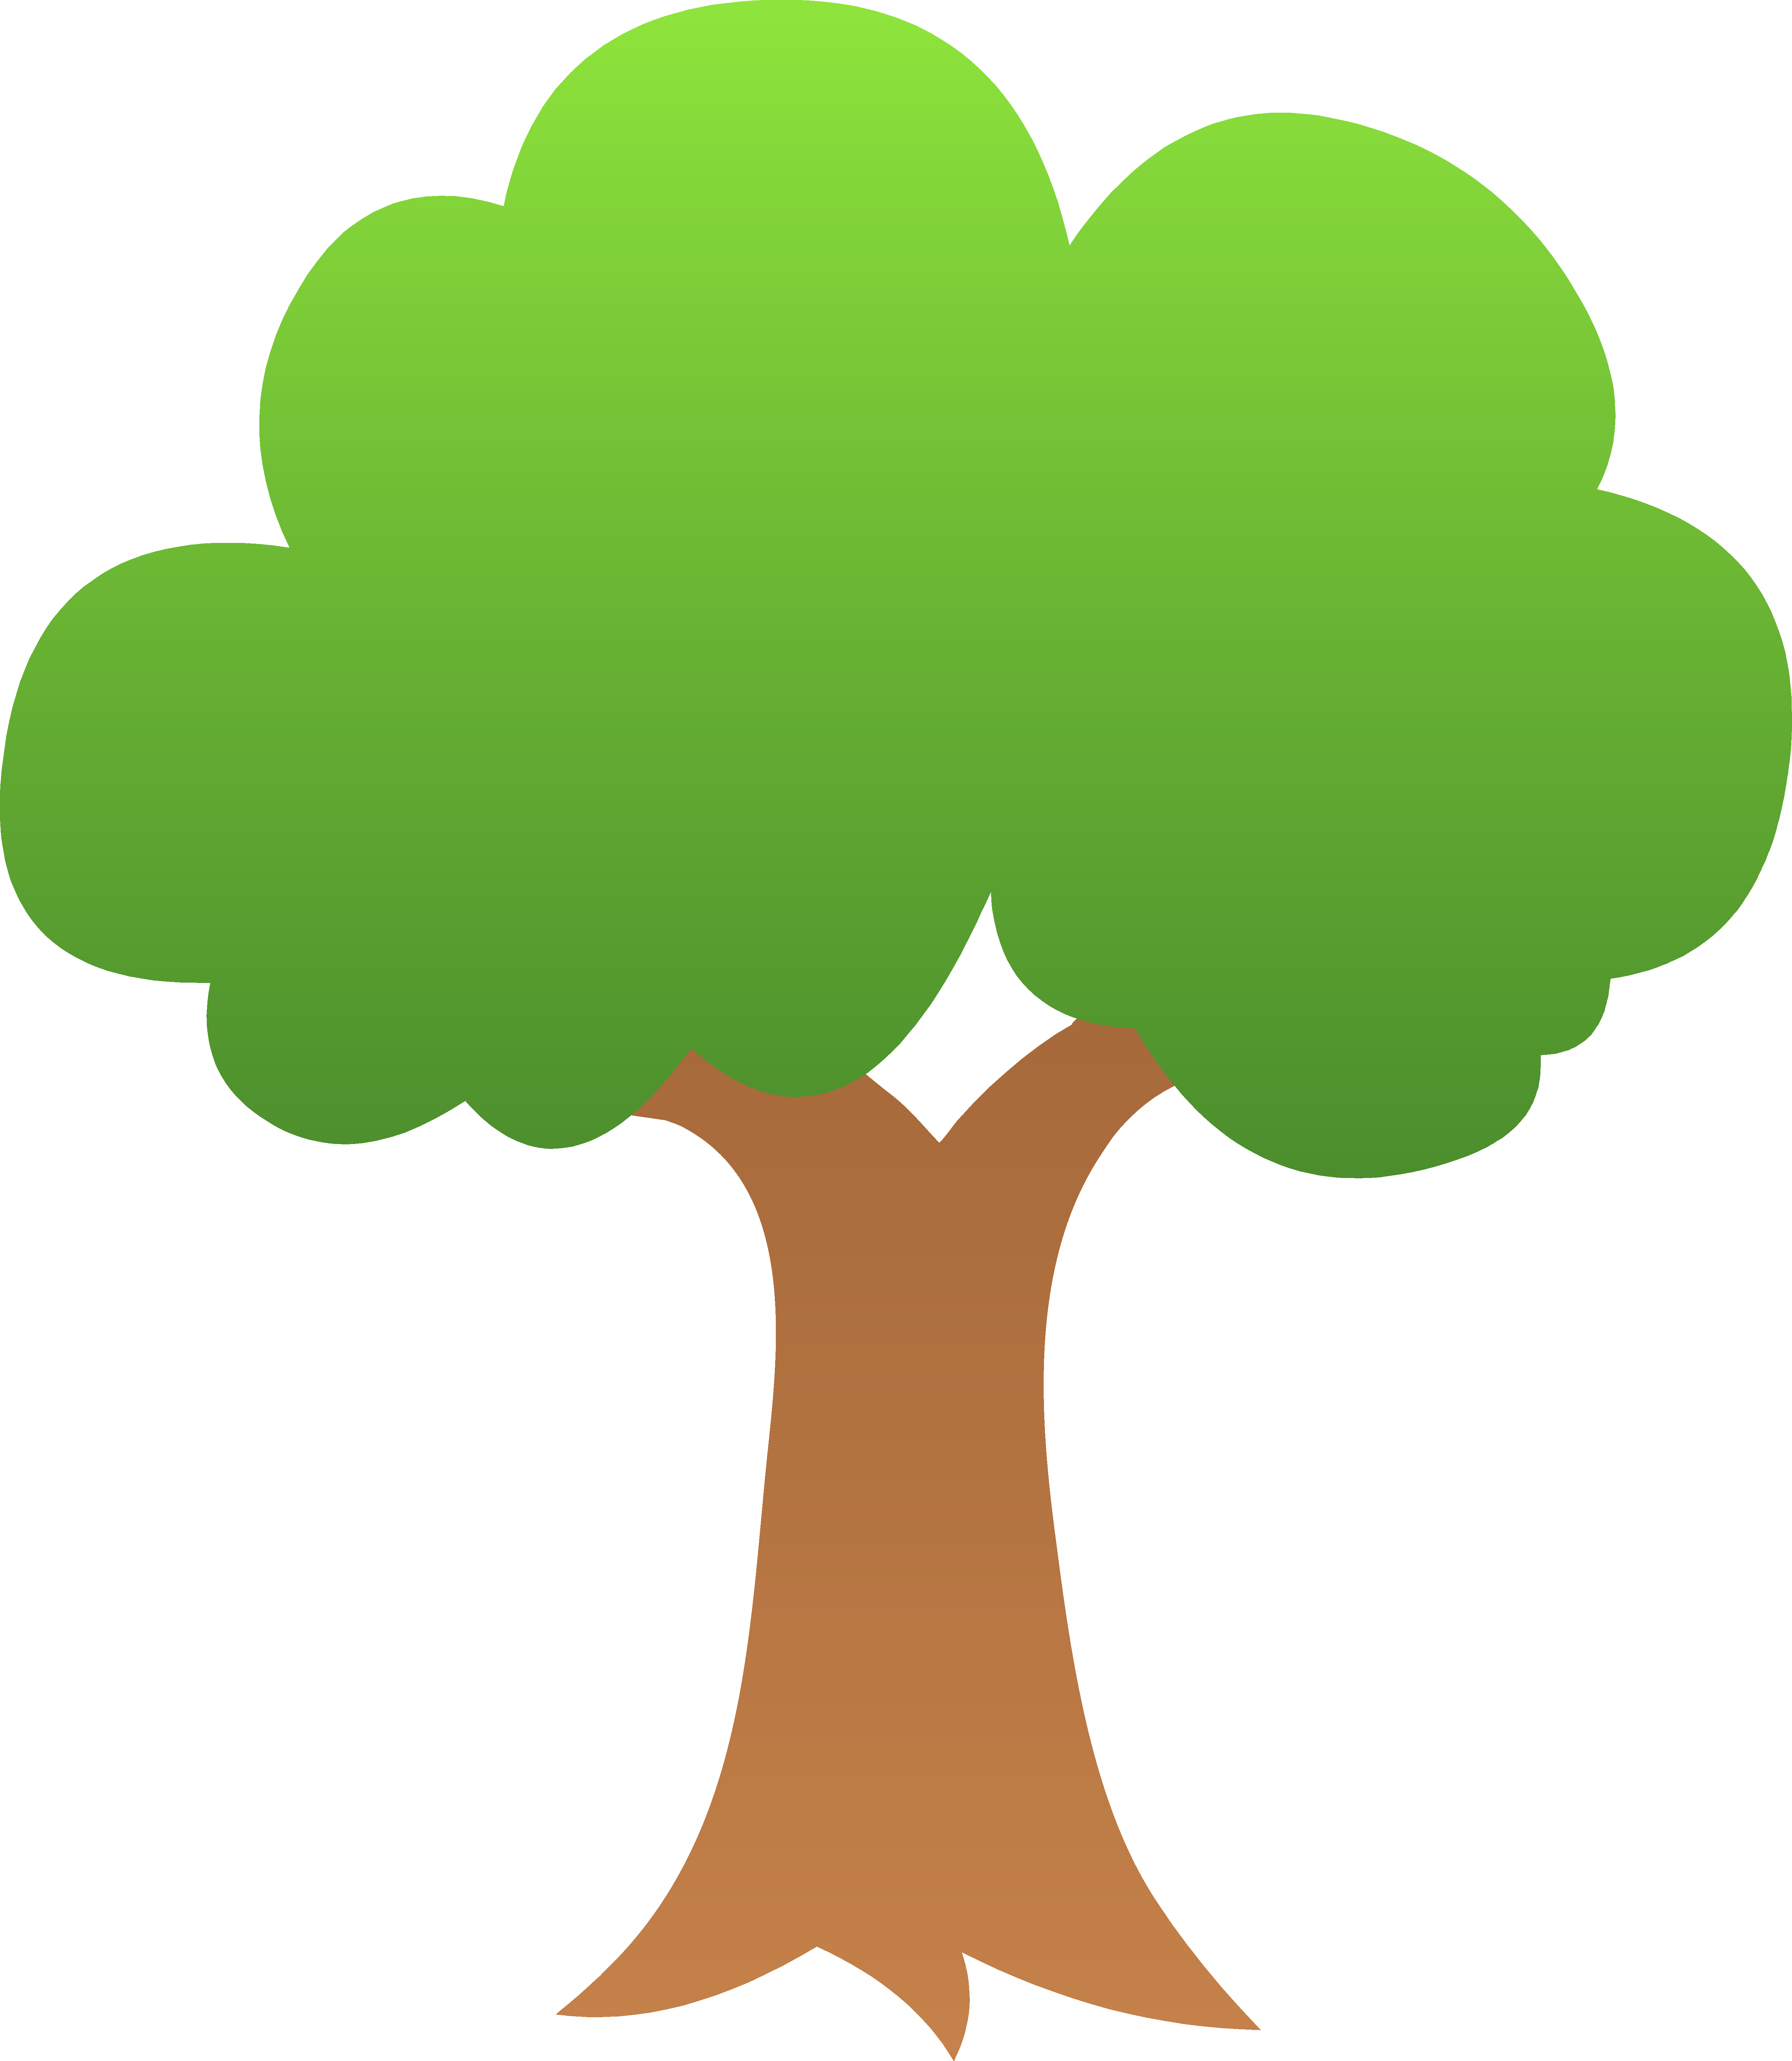 Free Tree Vector Png, Download Free Clip Art, Free Clip Art.